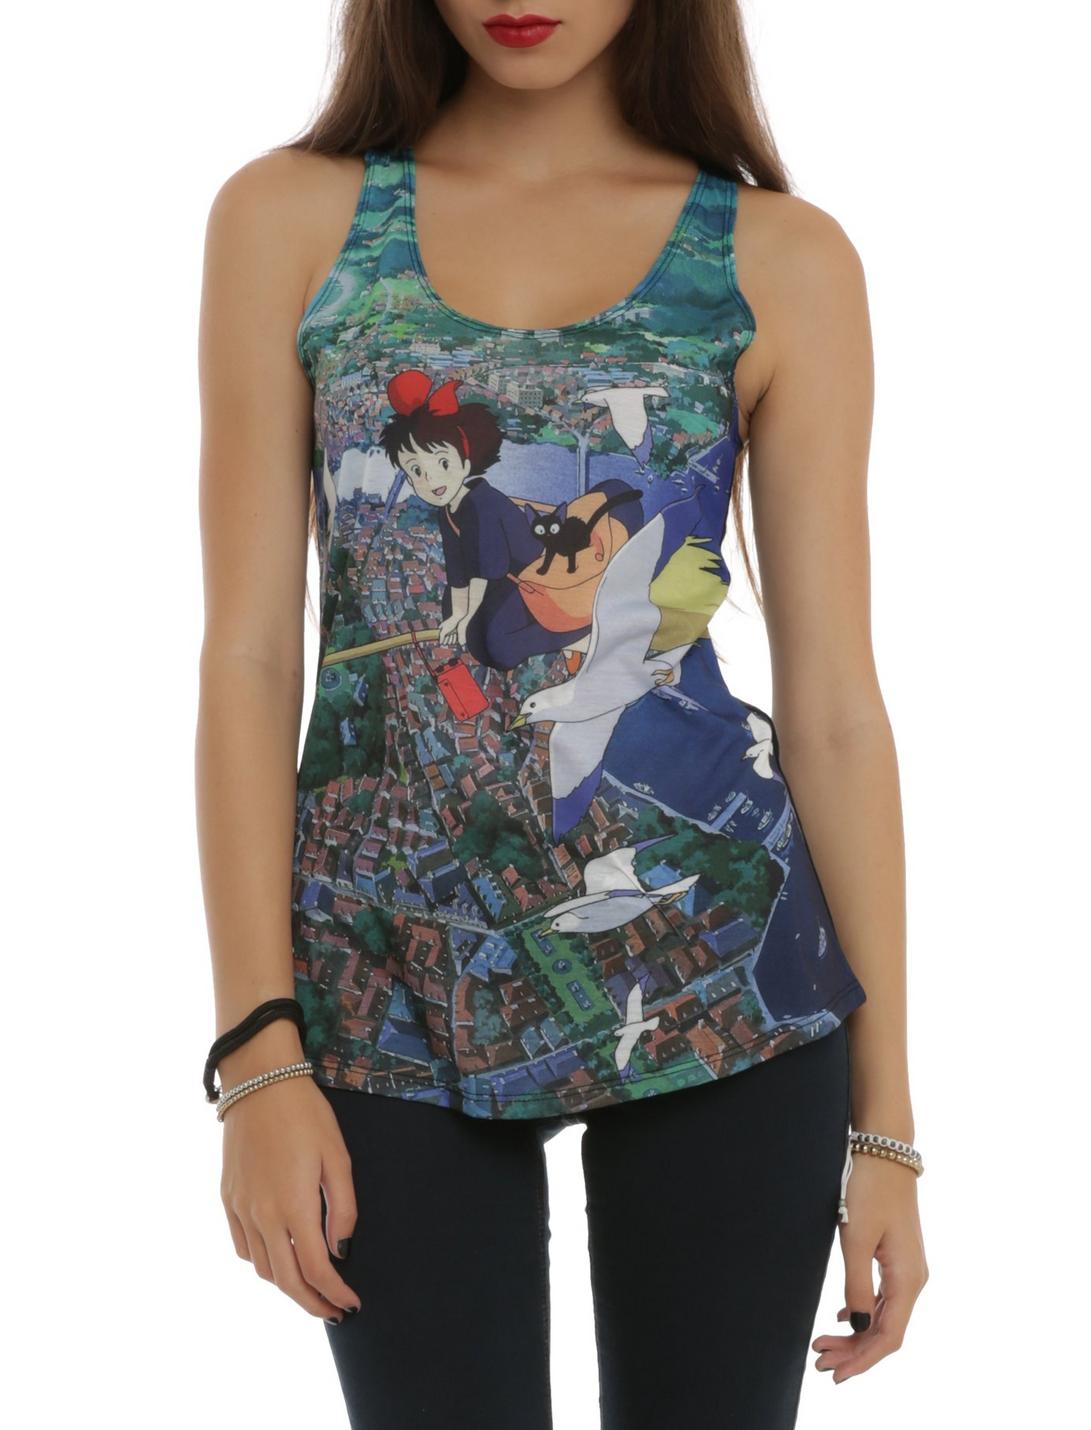 Studio Ghibli Her Universe Kiki's Delivery Service Flying Over City Girls Tank Top, , hi-res